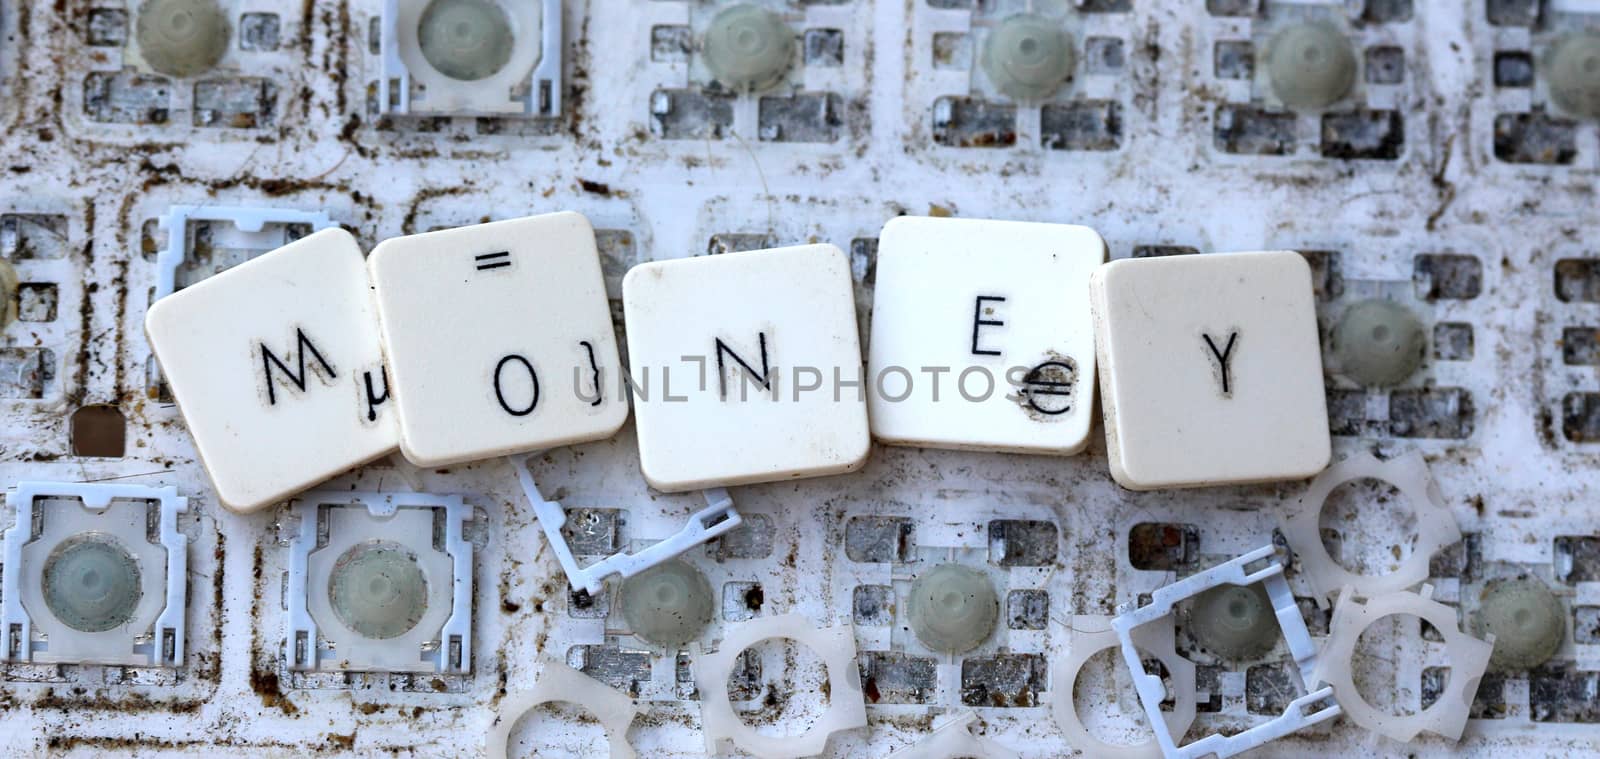 A close view of some keys on a dirty, yellowed keyboard.text money